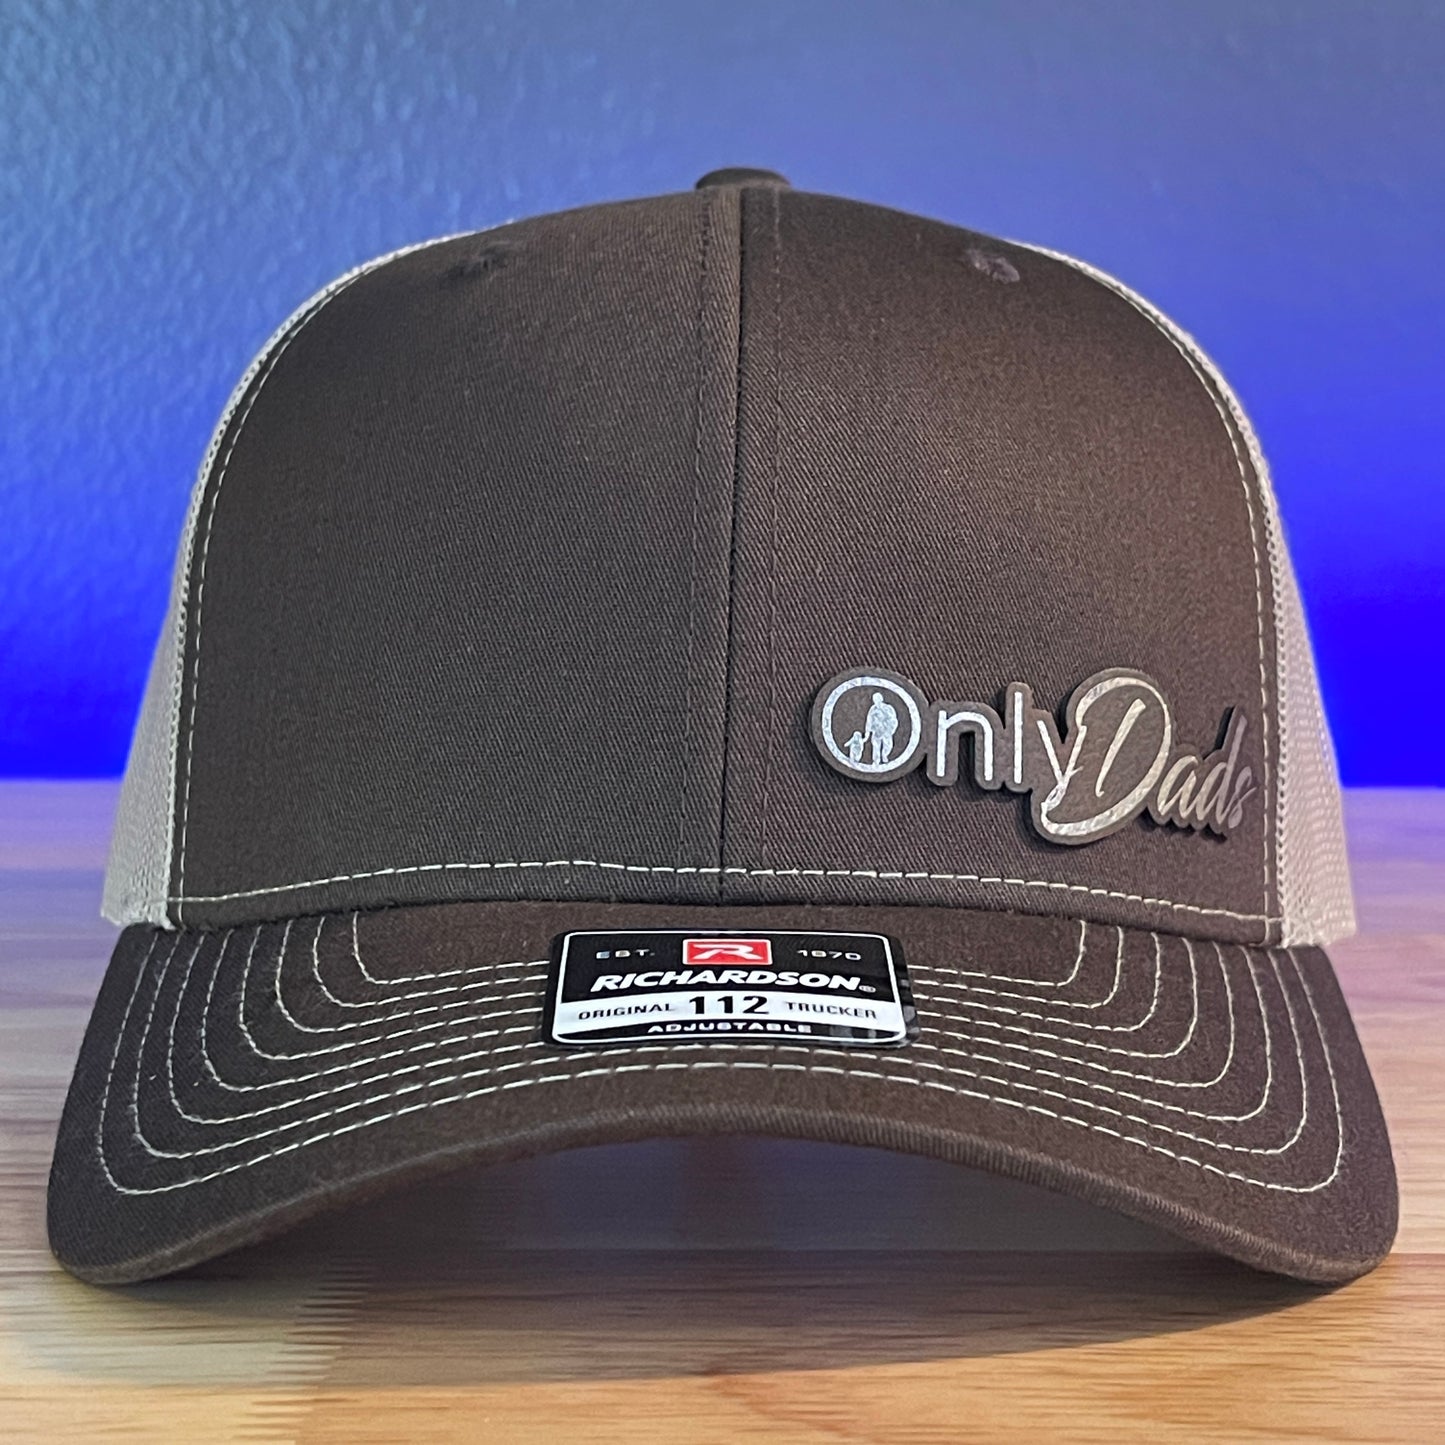 Only Dads Funny Leather Patch Hat Brown/Khaki